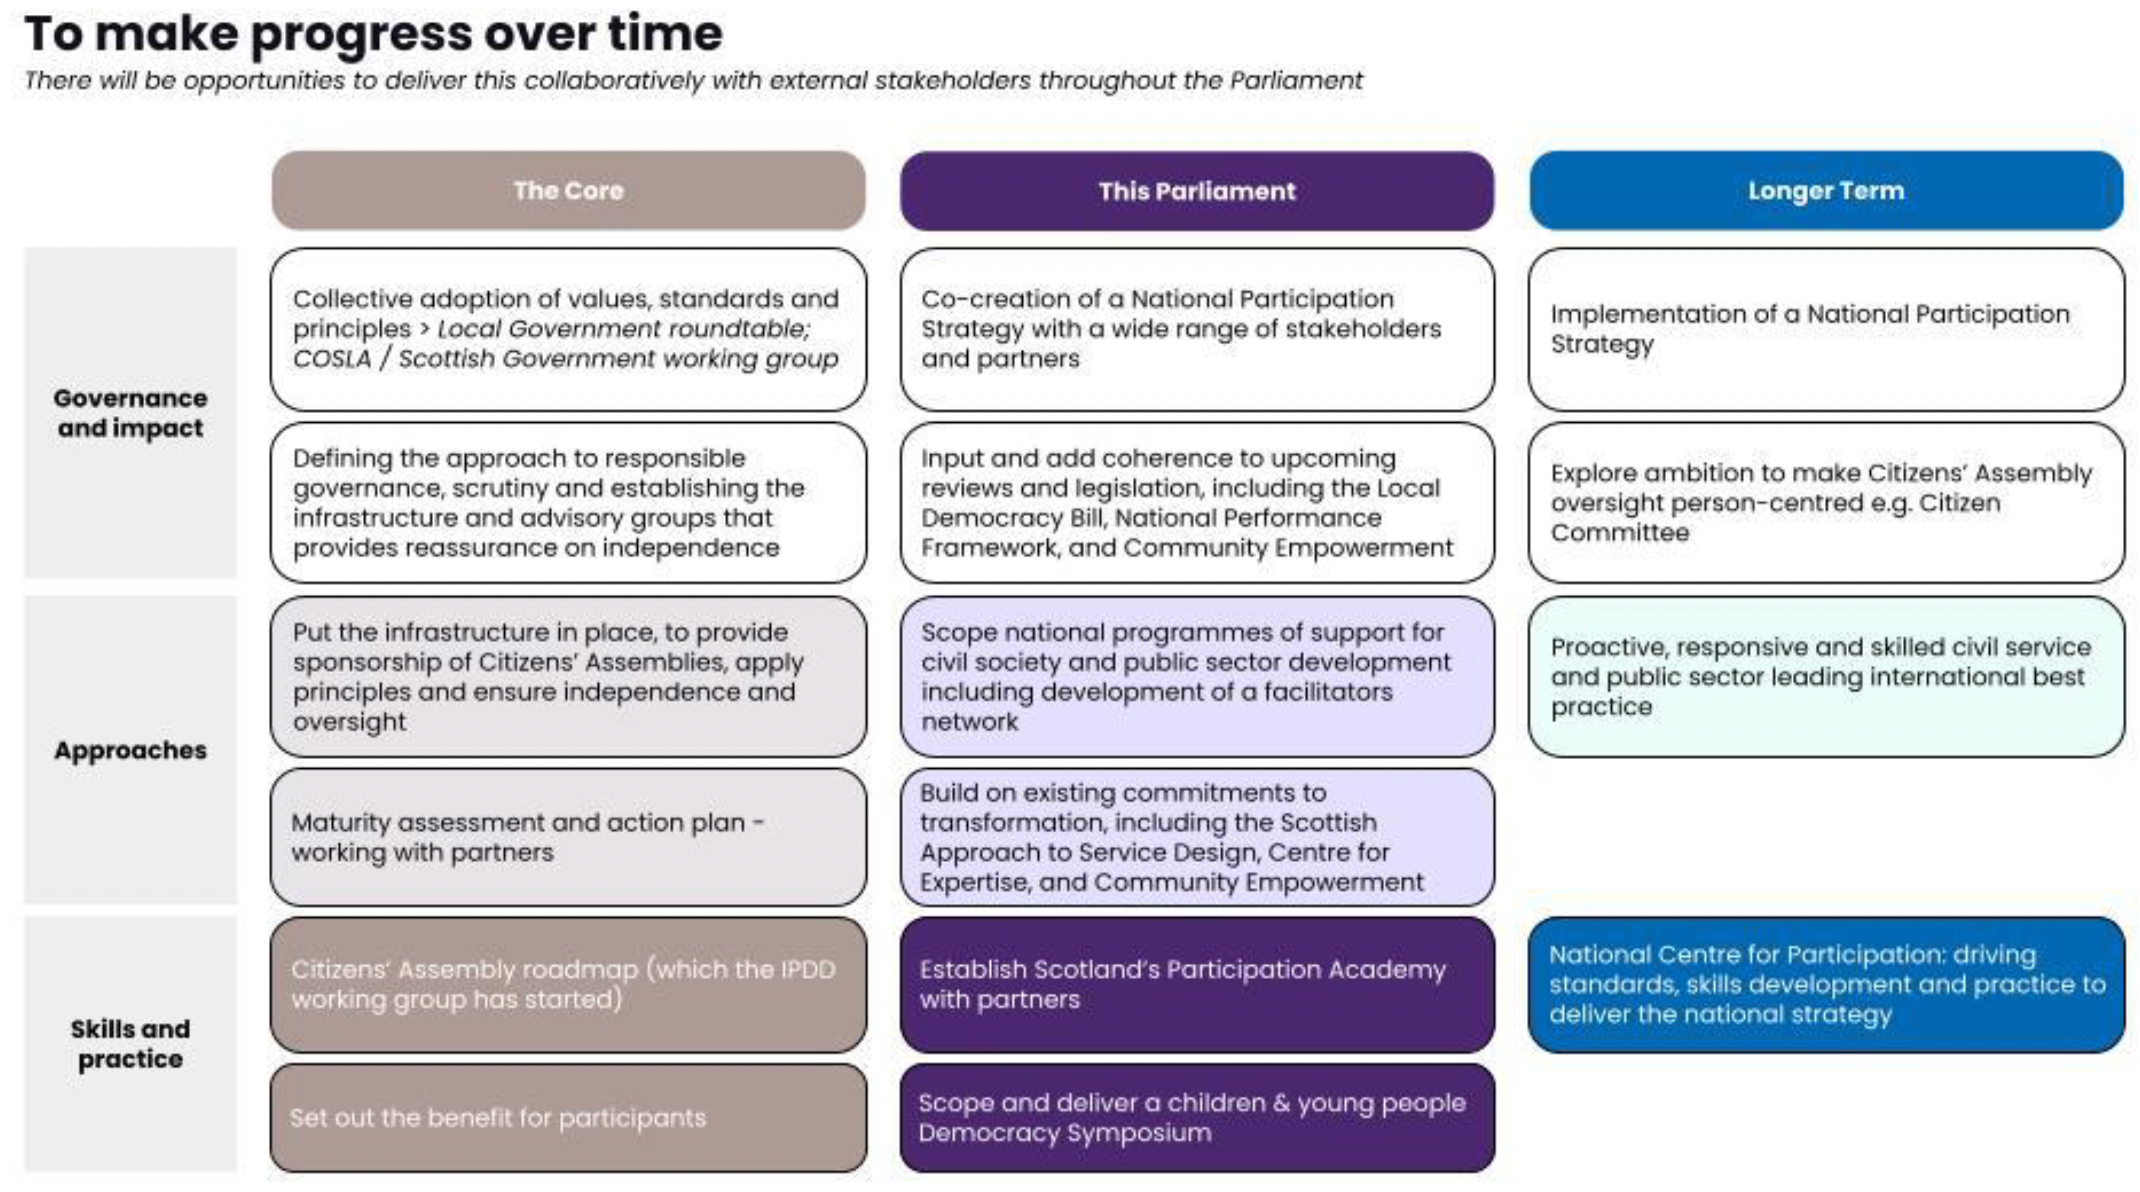 A set of actions that need to take place in order to make progress over time towards participatory democracy, organised 